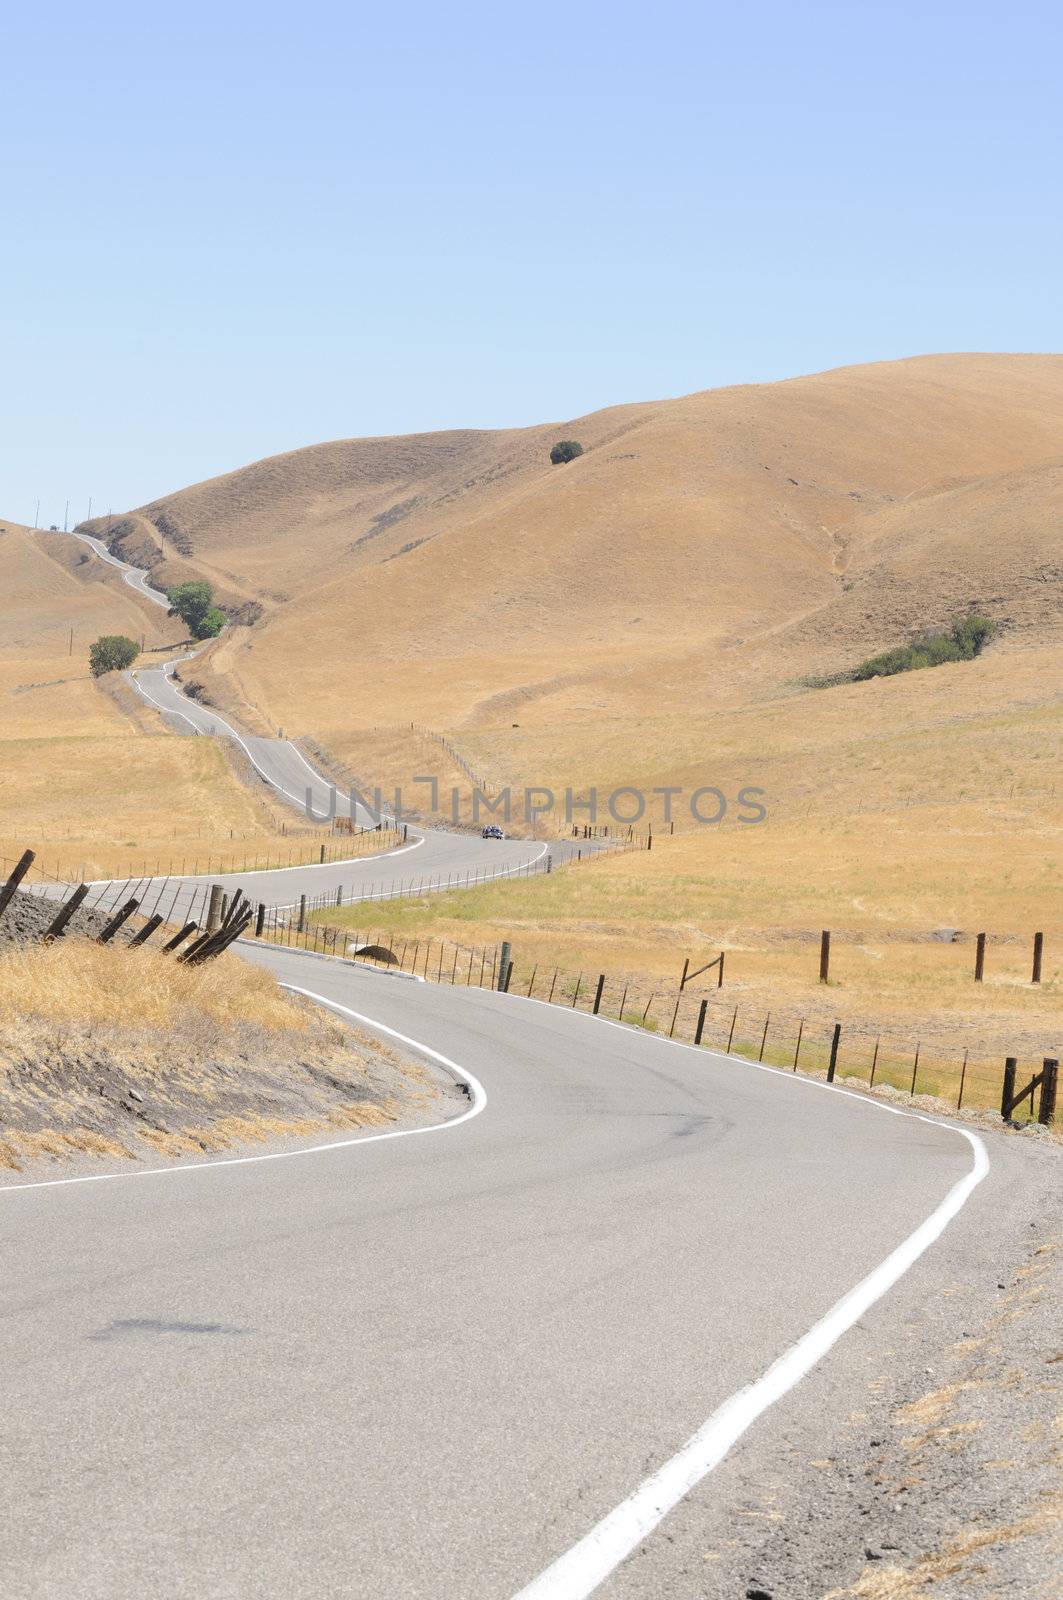 hot rod sports car negotiating a country road in California by jeffbanke